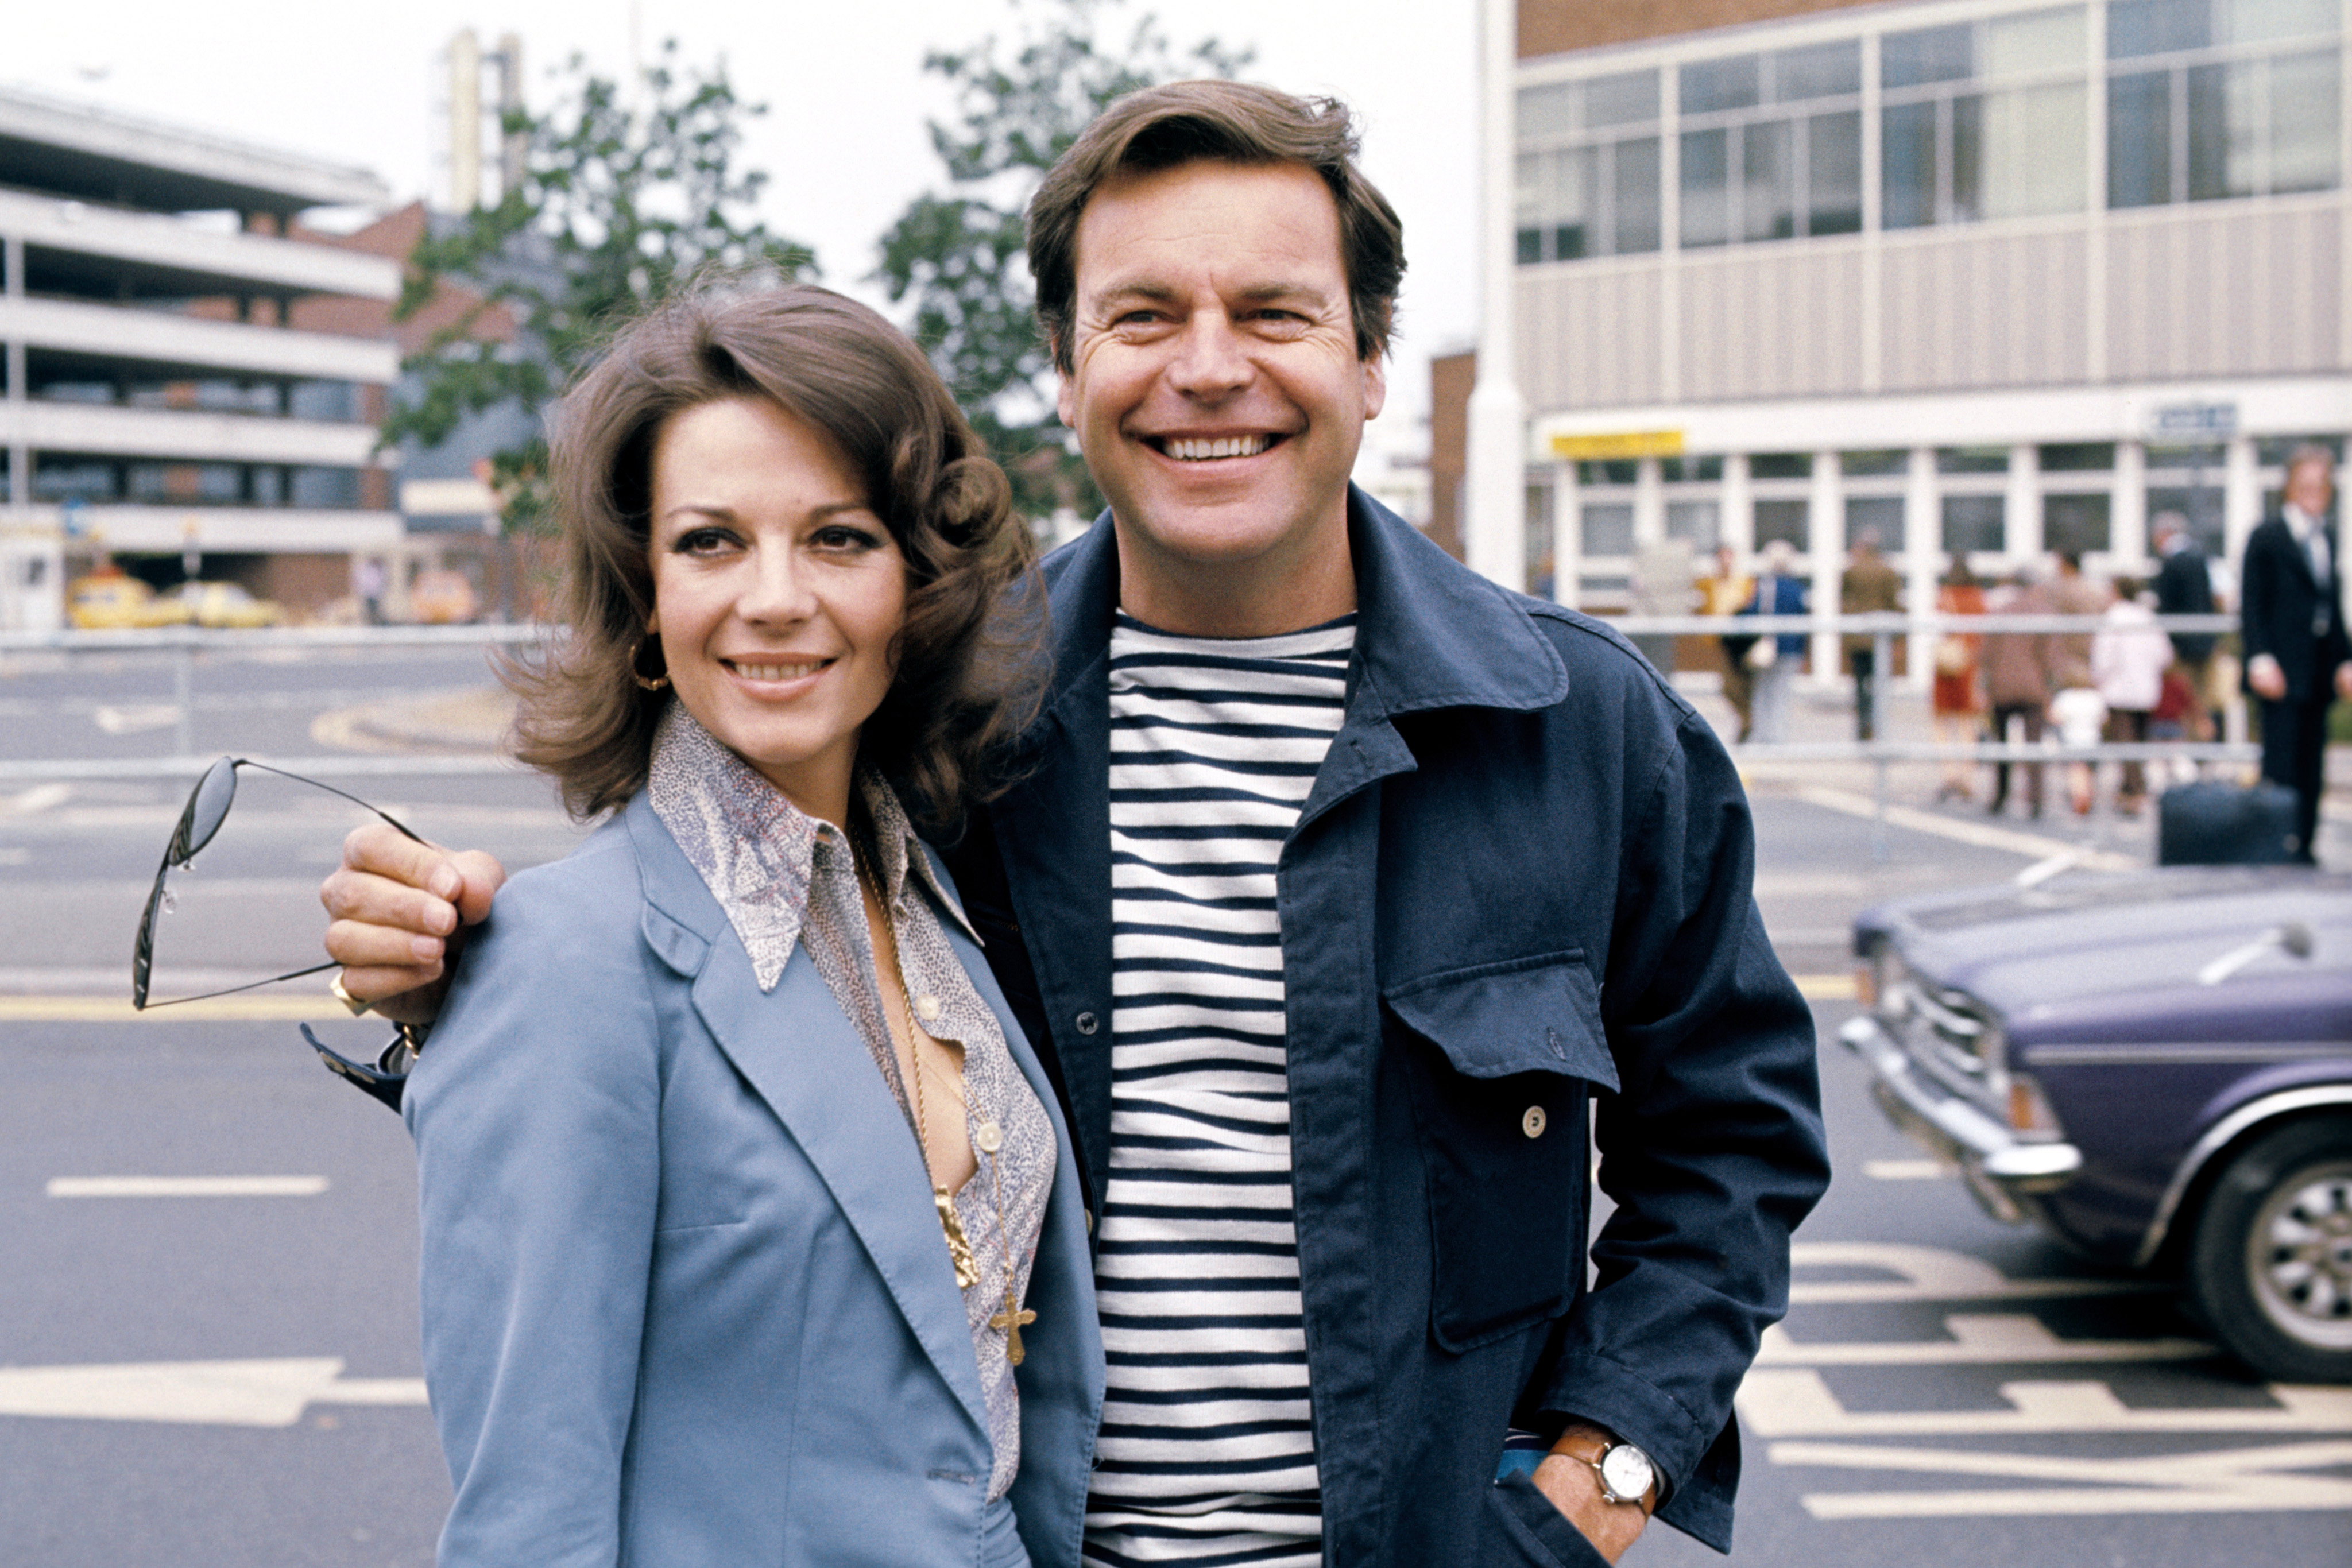 Natalie Wood and Robert Wagner in London, in 1976 | Source: Getty Images